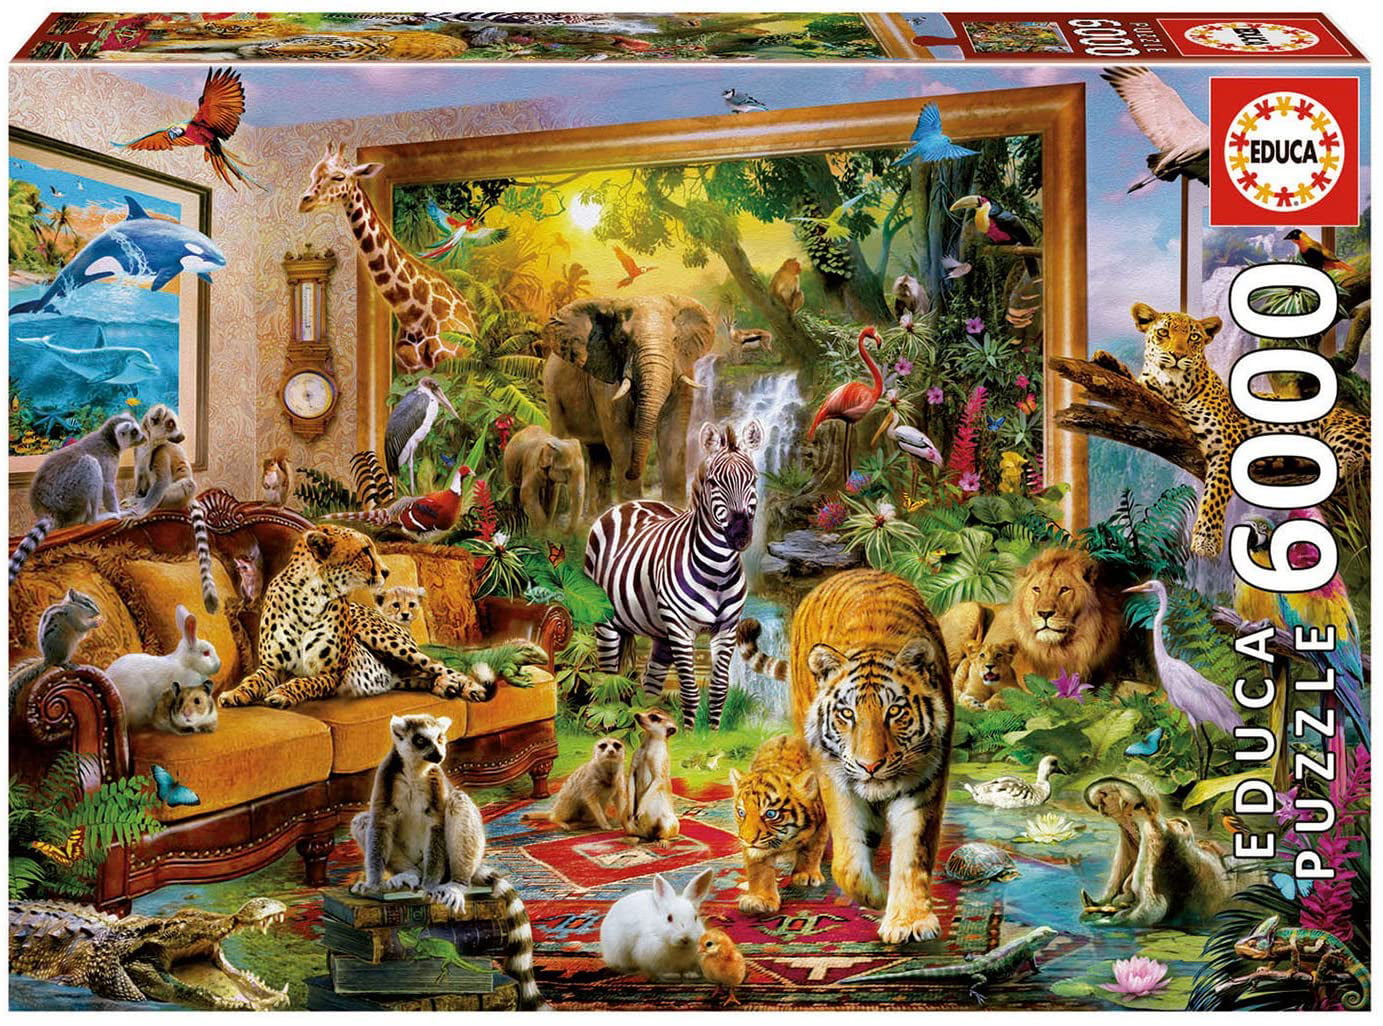 Jigsaw Puzzle 6000 Pieces for AdultsWhite tiger-6000 Jigsaw Puzzle Game Toys Gift Brain IQ Developing Magical Game 